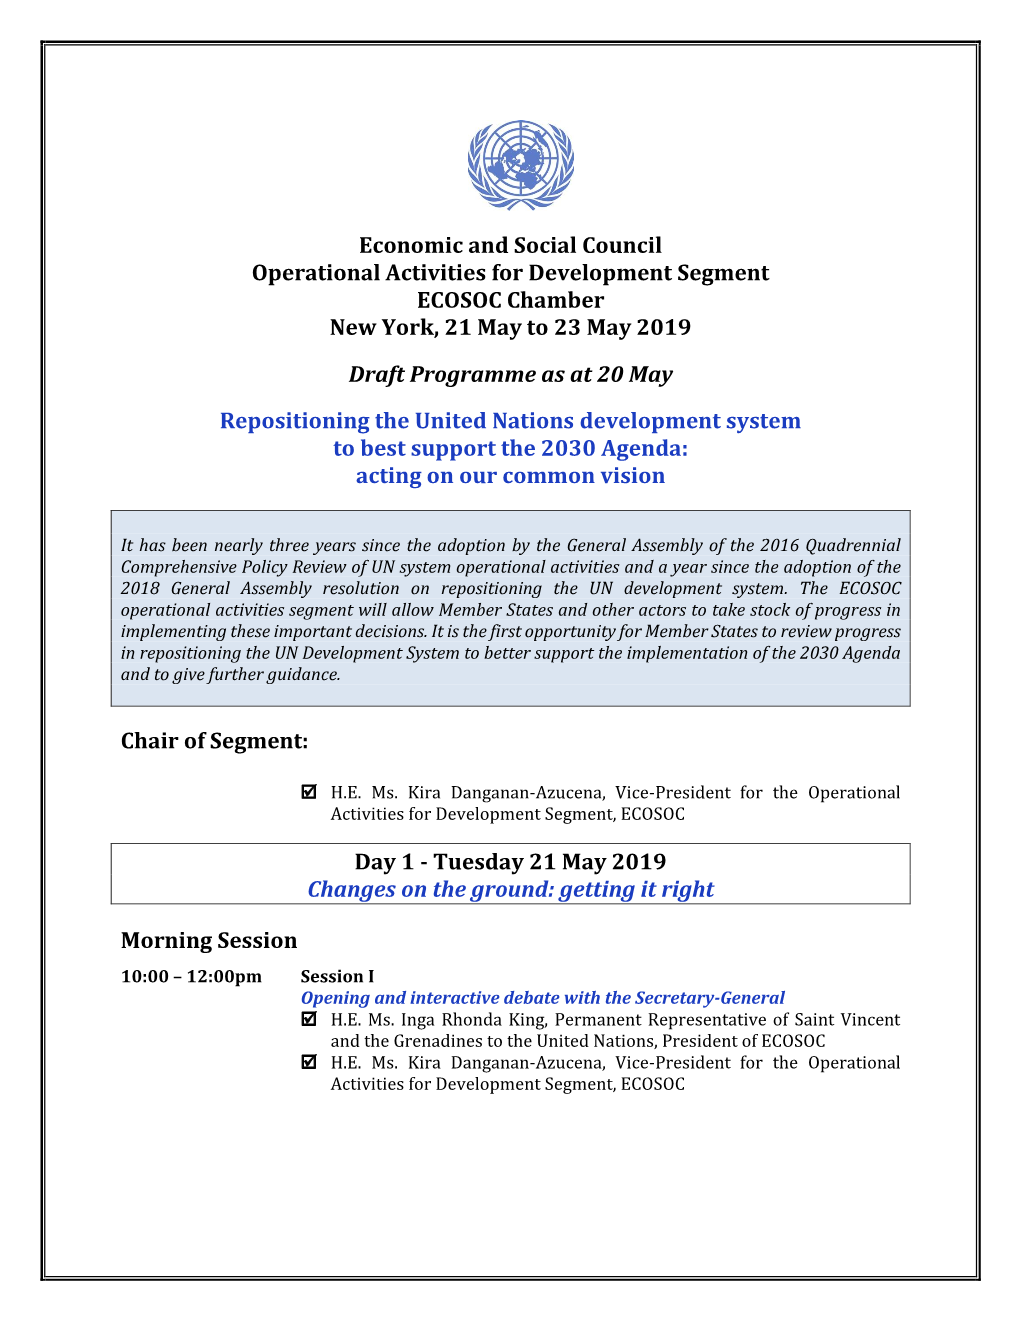 Economic and Social Council Operational Activities for Development Segment ECOSOC Chamber New York, 21 May to 23 May 2019 Draft